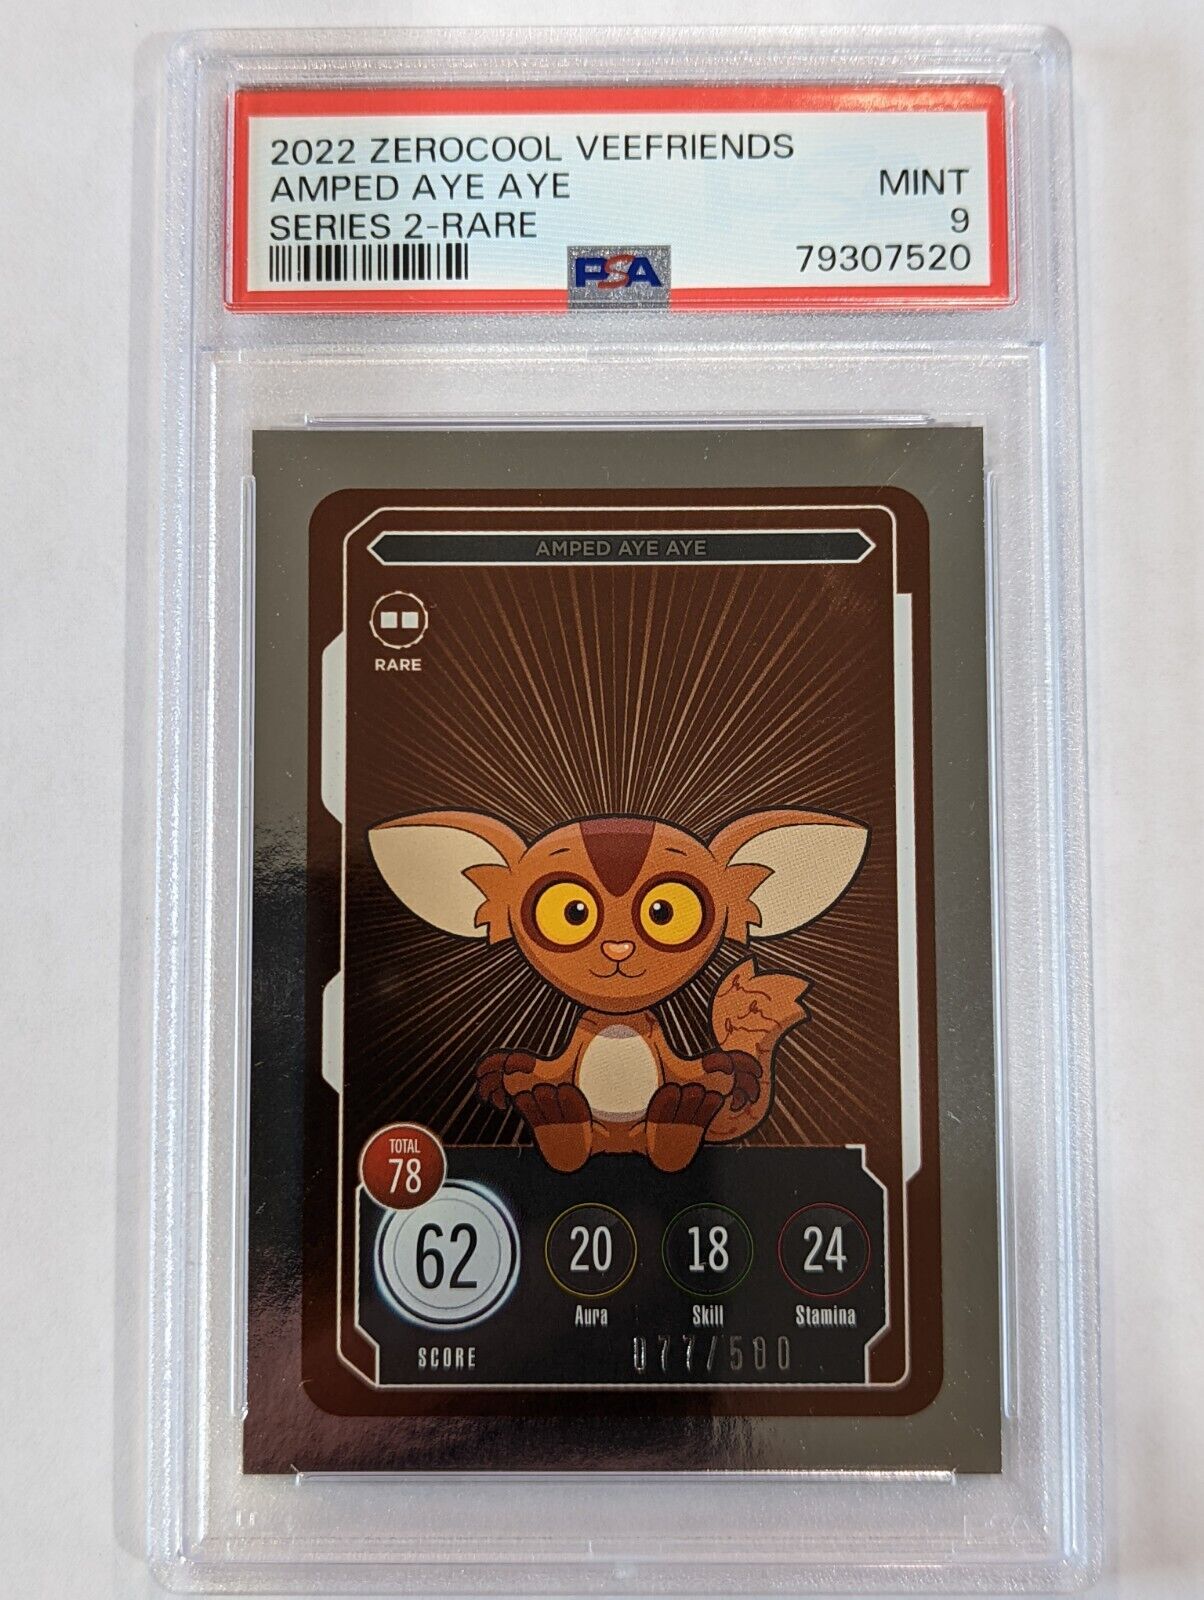 Amped Aye Aye VeeFriends Compete Collect Series 2 Rare /500 PSA 9 Mint